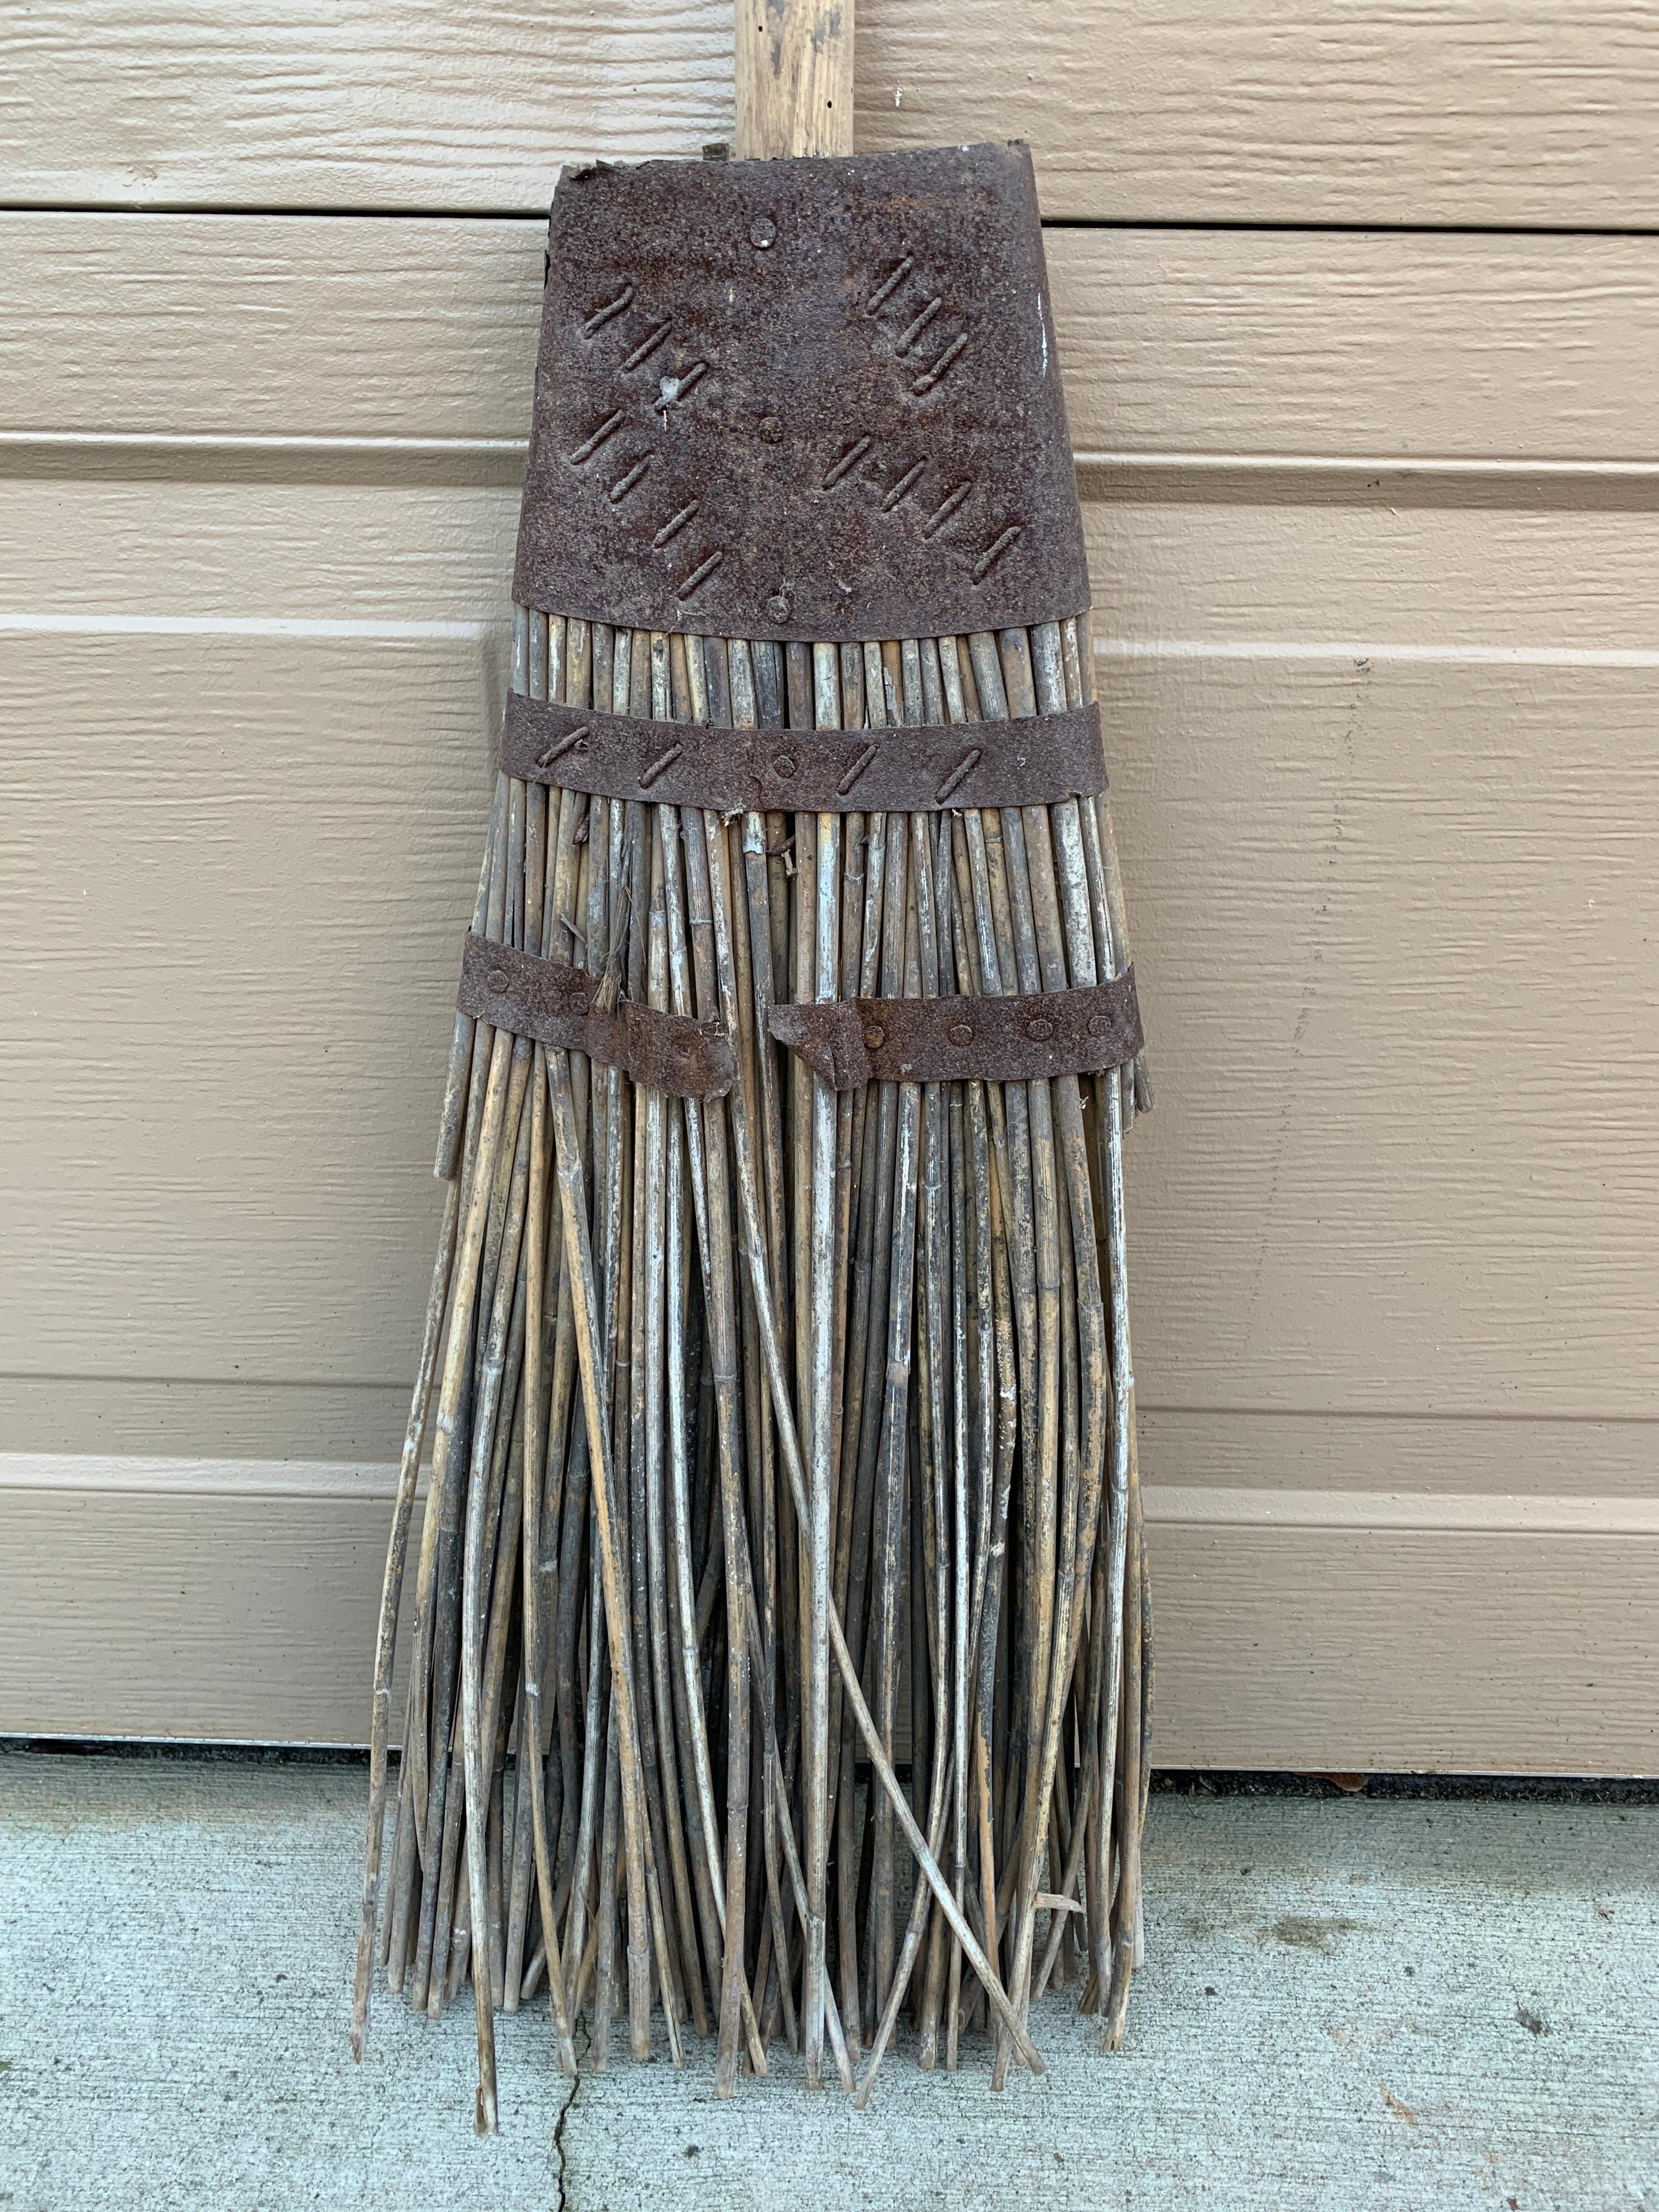 American Antique Early 19th Century Rustic Hand Made Wooden Broom For Sale